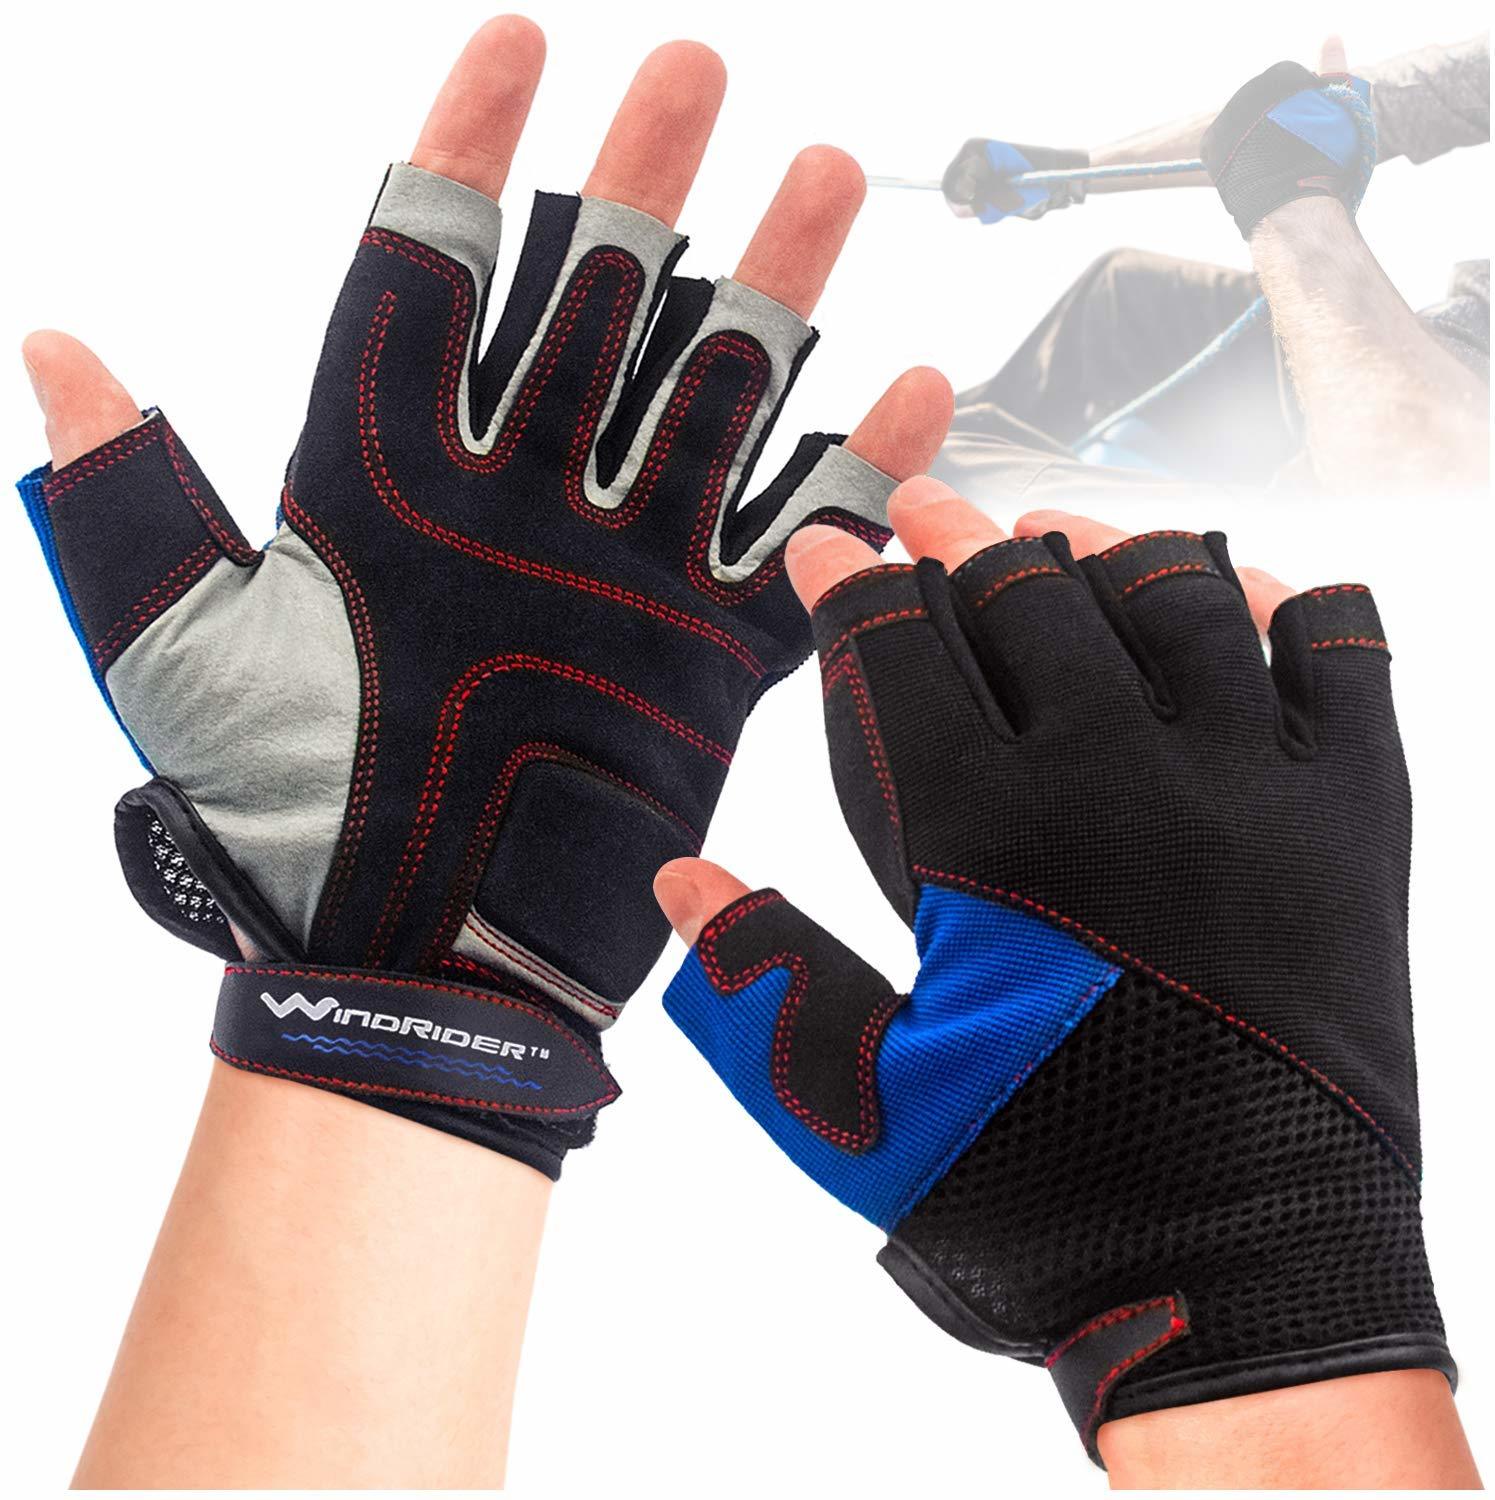 SCH NEW Thunderwear Leather Palms finger gloves size L Cycling Sailing 